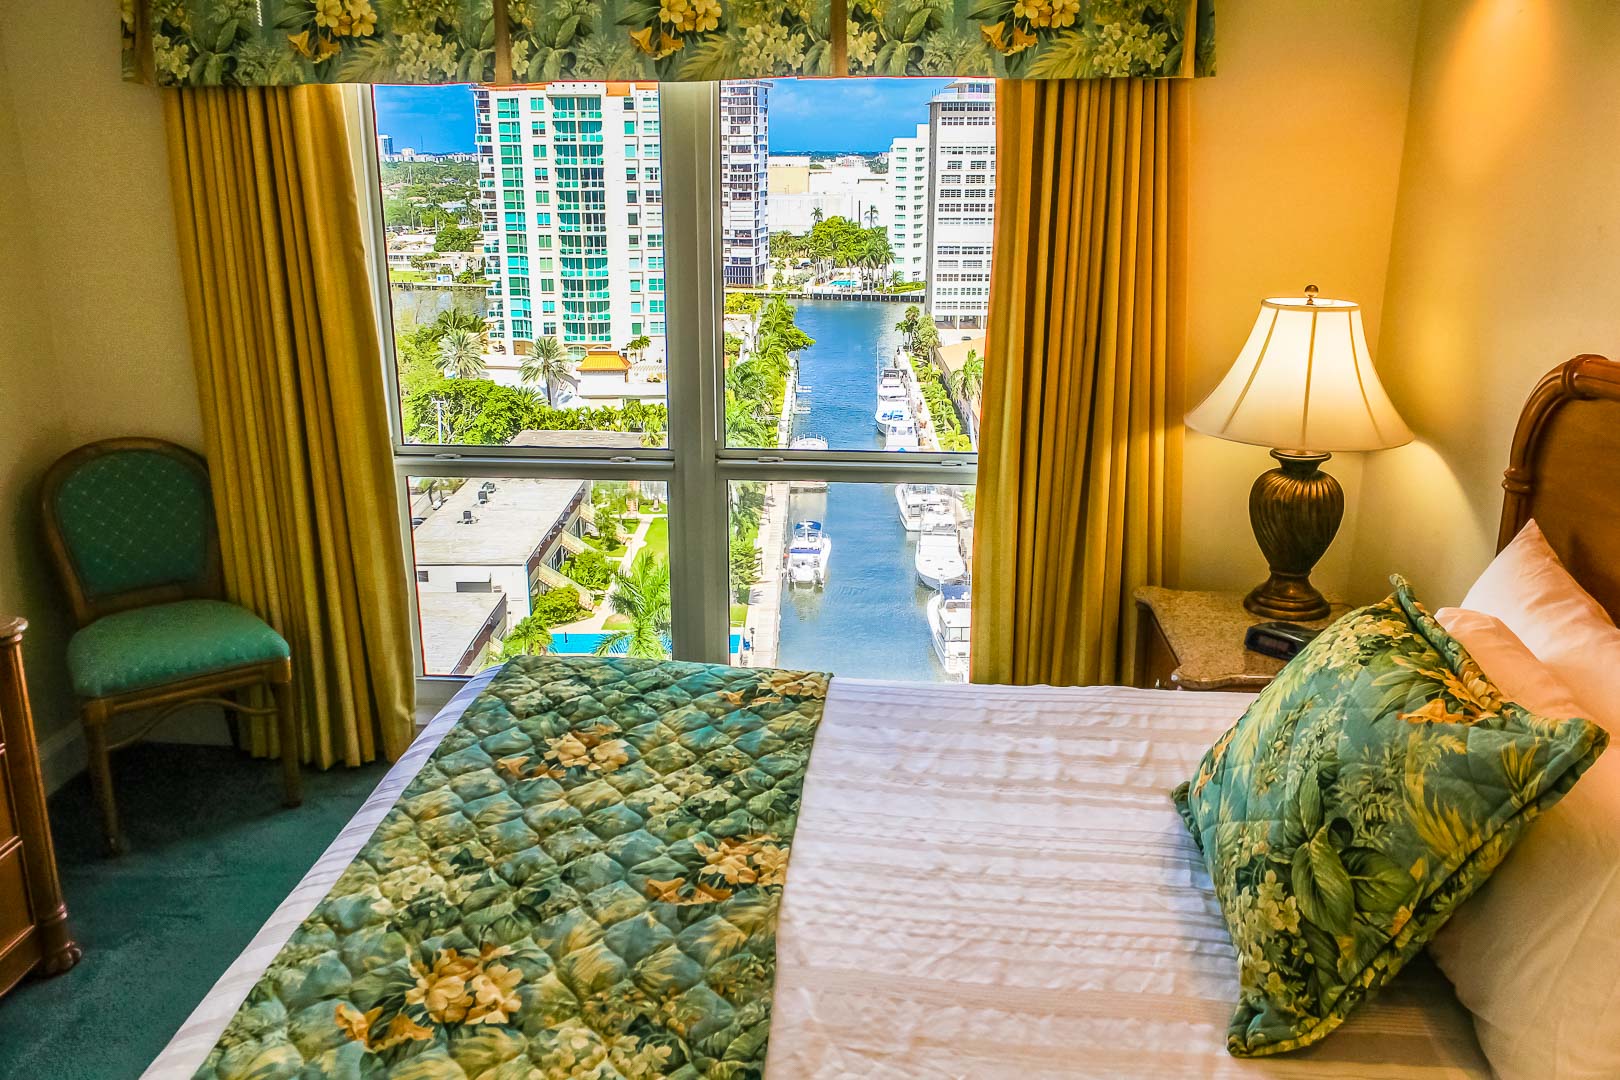 A master bedroom with a beautiful view at VRI's Ft. Lauderdale Beach Resort in Florida.